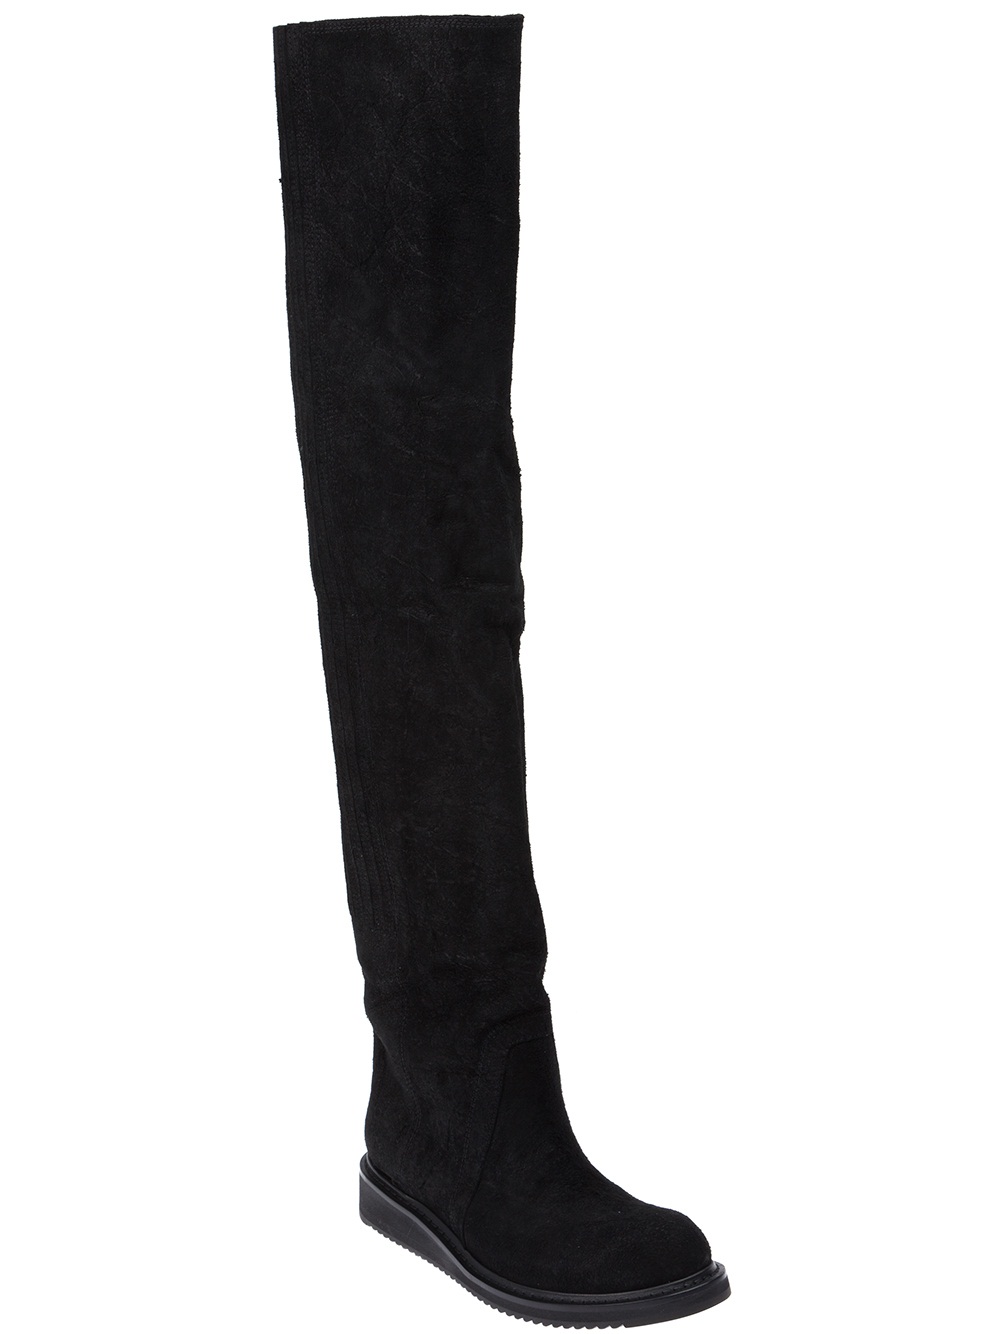 Lyst - Rick Owens Thigh High Leather Boots in Black